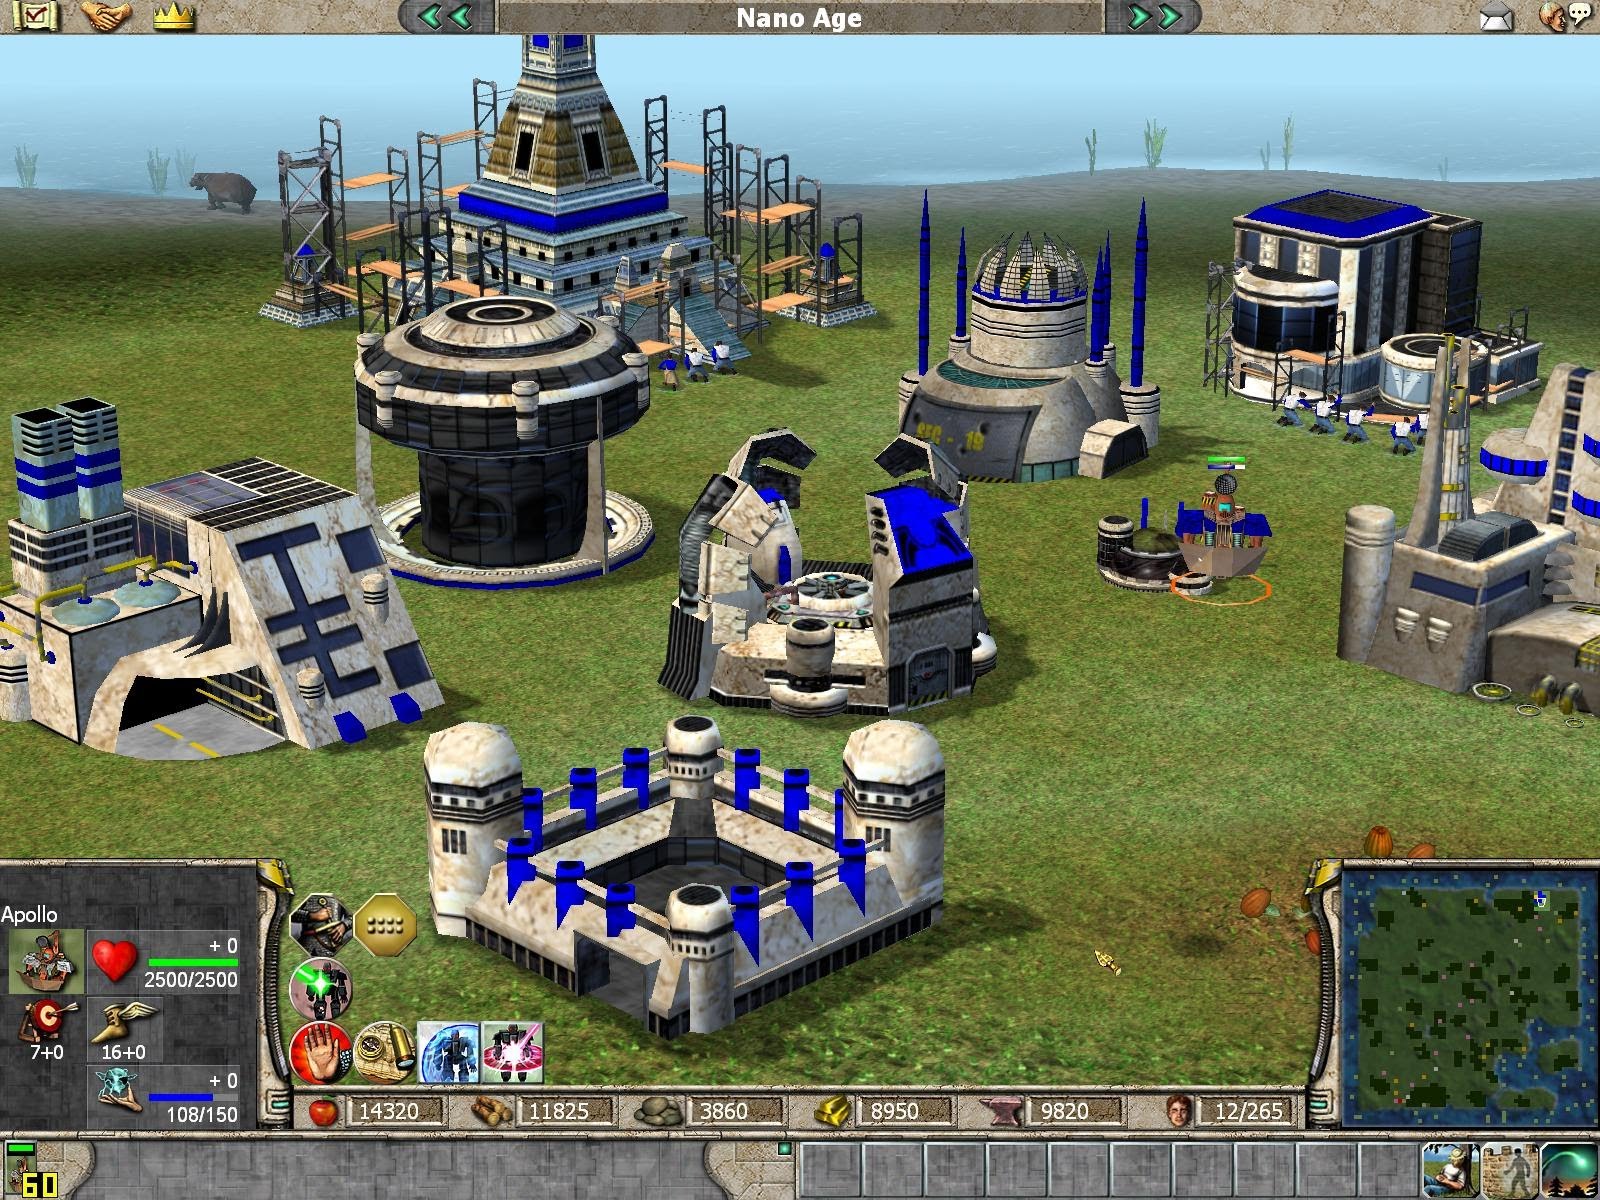 Empire Earth 3 Game - GOG - Free Download Torrent q Empire Earth 3 Game - GOG - Free Download Torrent